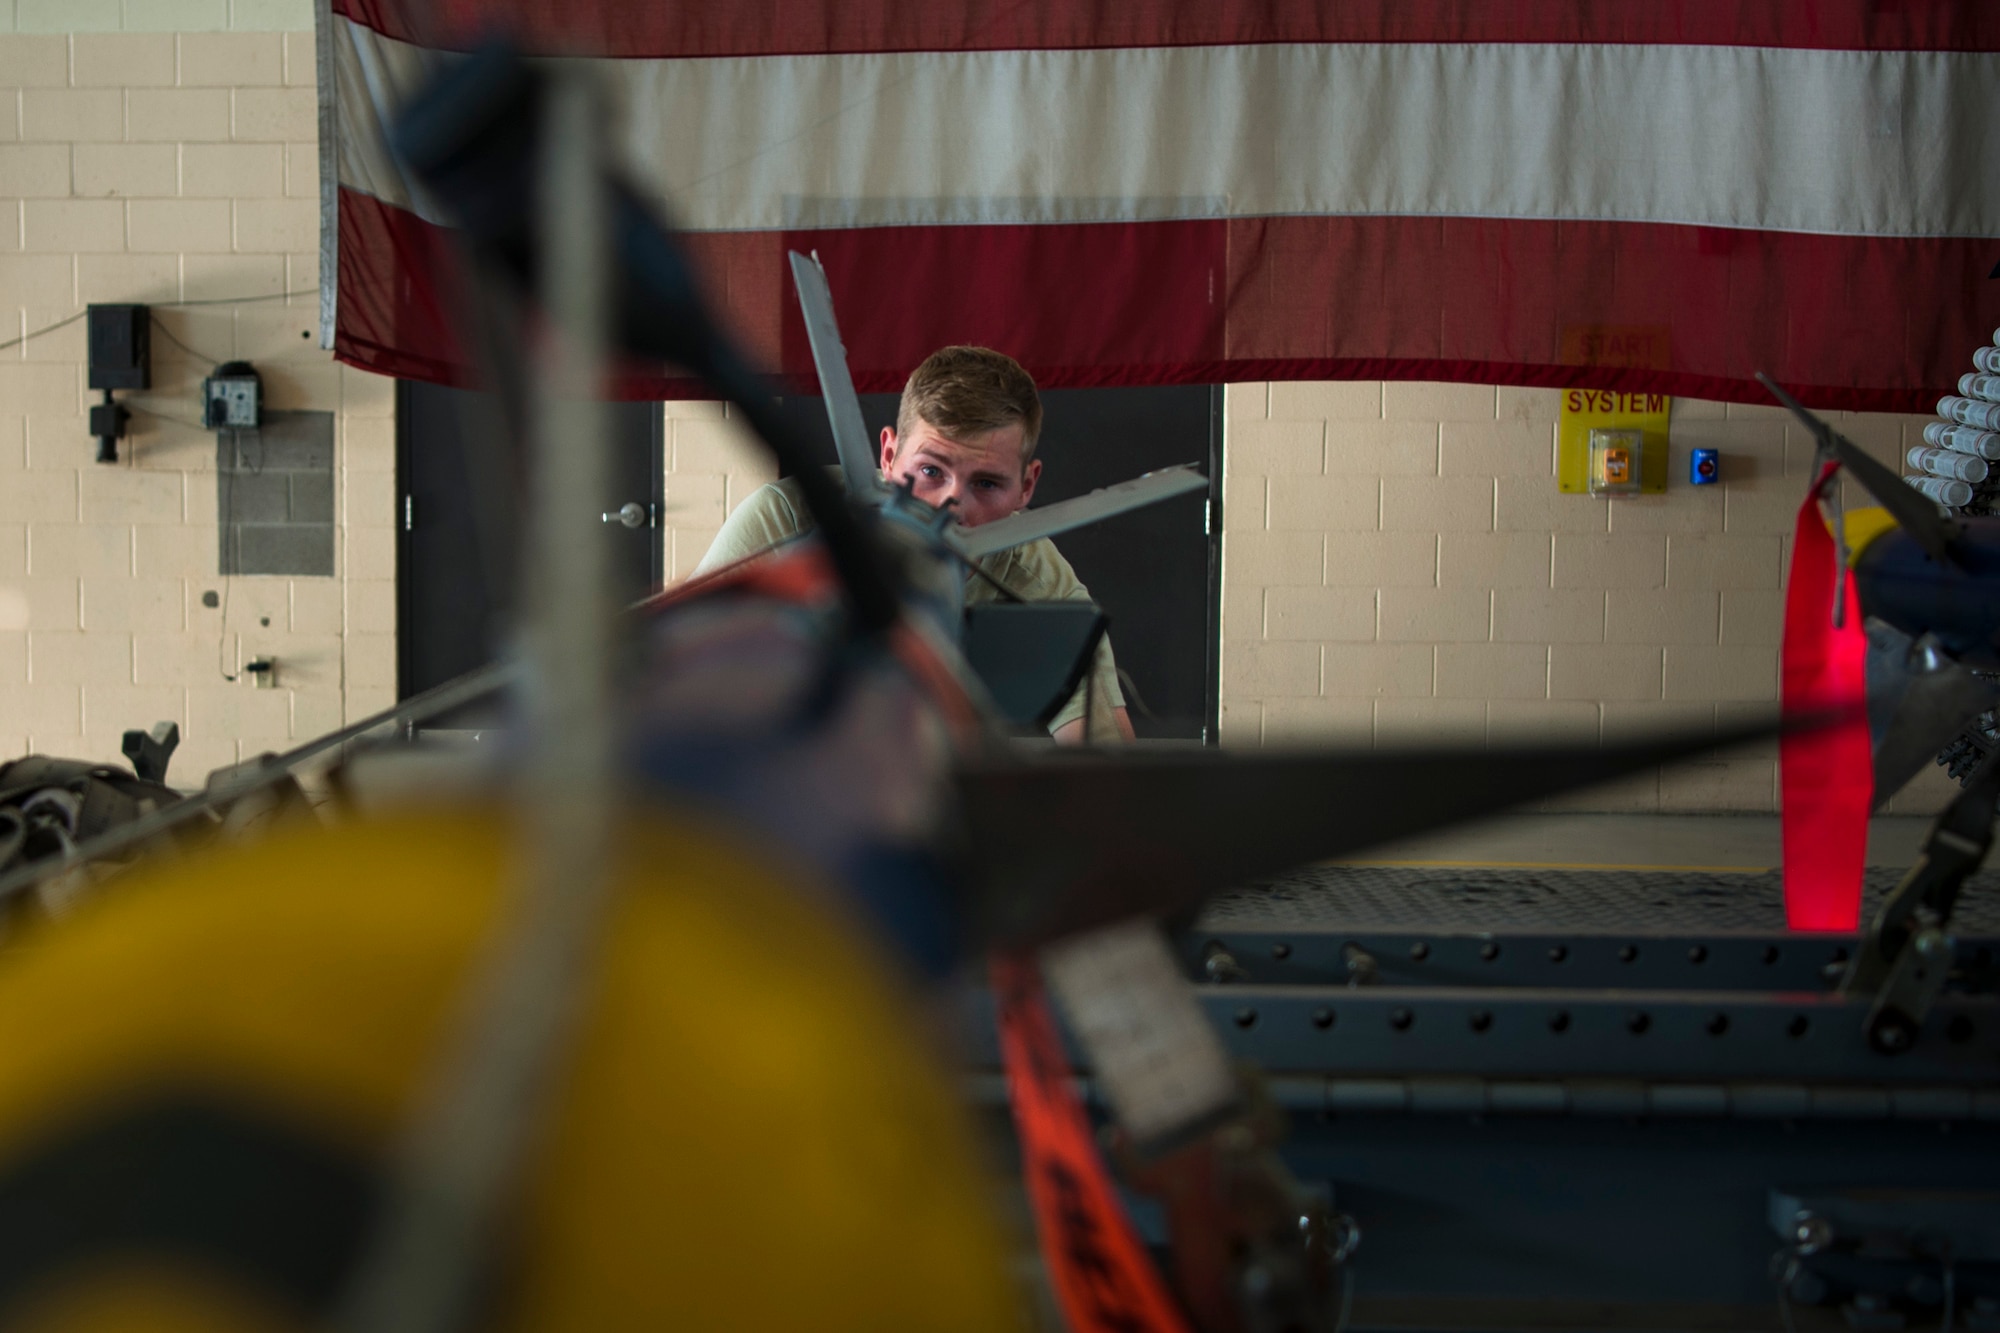 Senior Airman Robert Monk, 23d Aircraft Maintenance Squadron weapons load crew member, inspects an AIM-9 Sidewinder missile during a Monthly Proficiency Required Load (MPRL), Aug. 7, 2018, at Moody Air Force Base, Ga. The weapons standardization section ensures weapons load crews are combat ready through evaluations consisting of MPRLs, semi-annual evaluations and flightline inspections. (U.S. Air Force photo by Airman Taryn Butler)